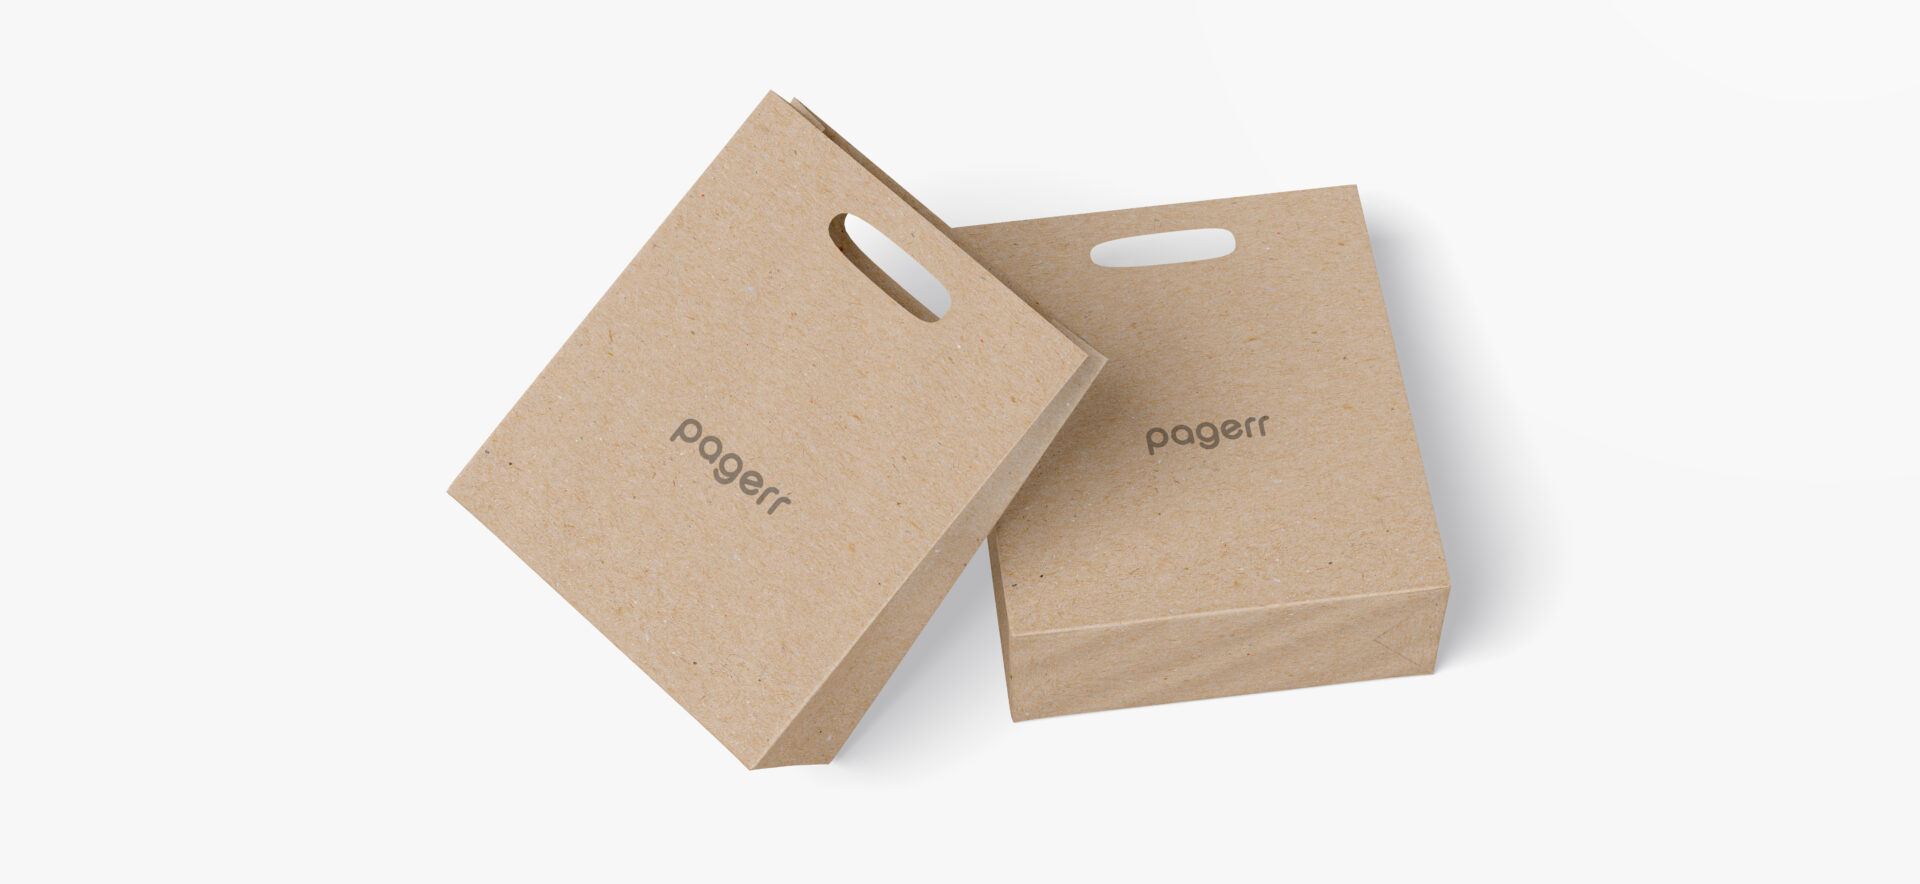 Takeaway bags in Adelaide - Print with Pagerr